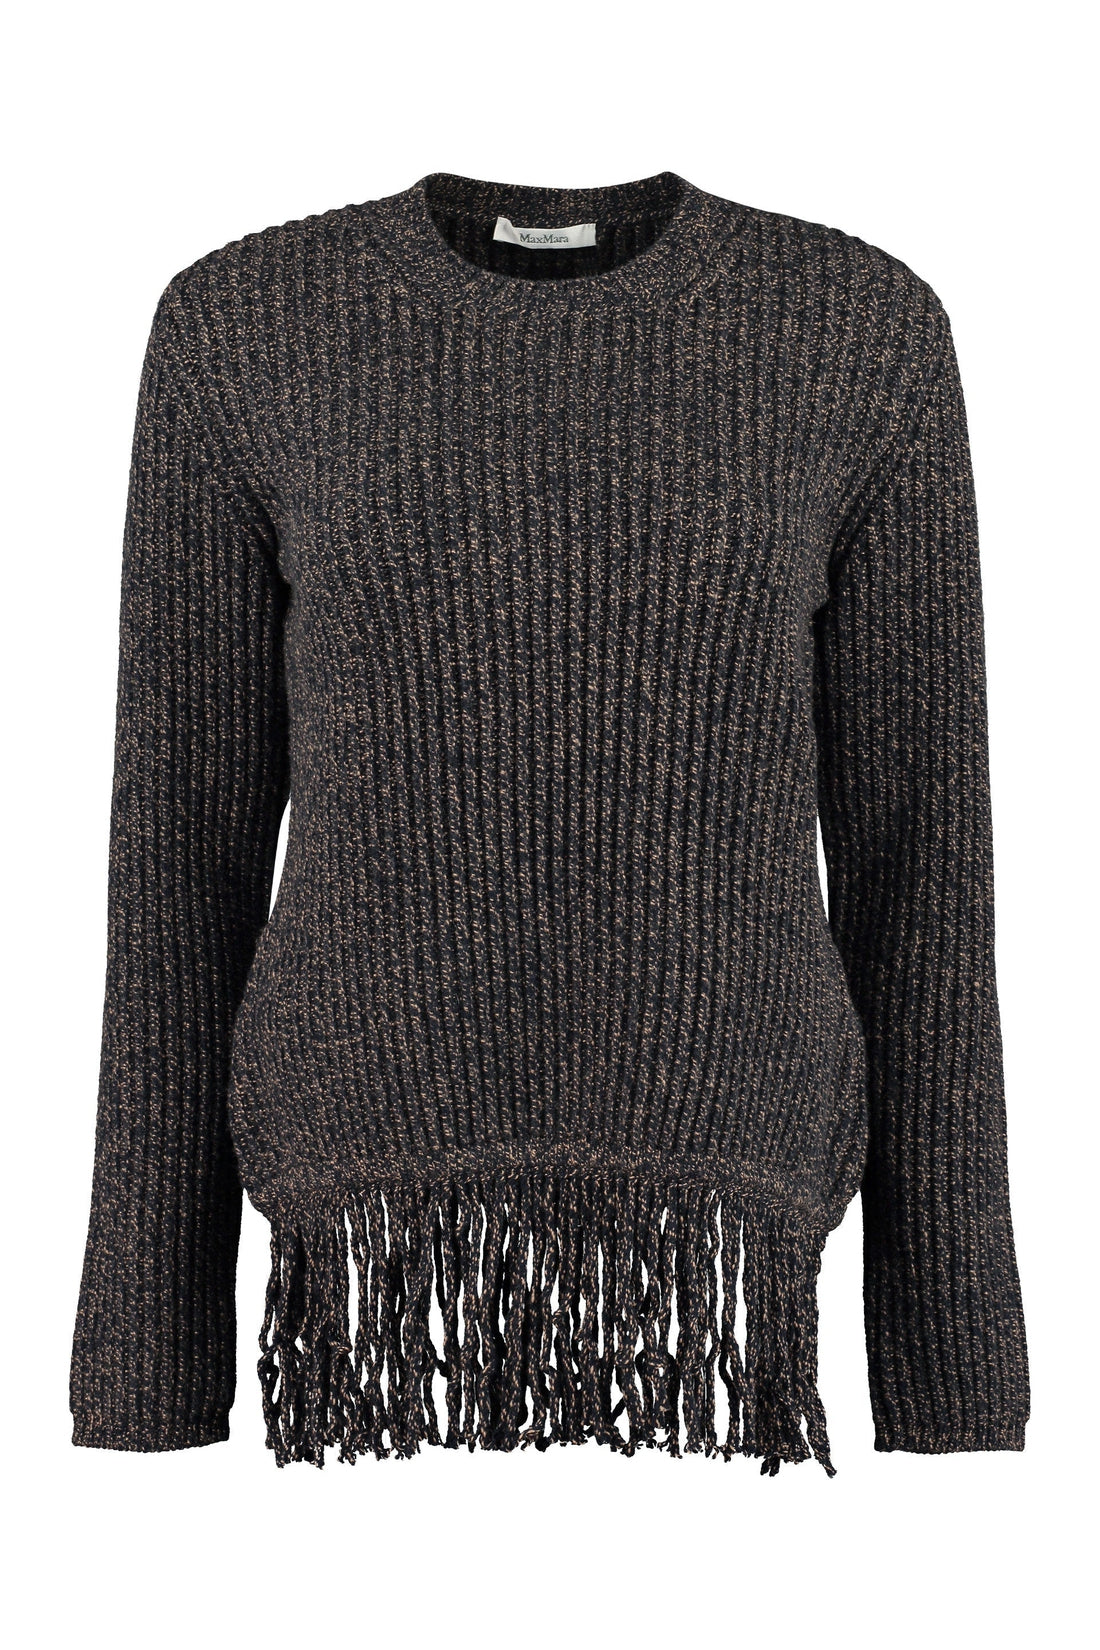 Max Mara-OUTLET-SALE-Femme ribbed sweater with fringes-ARCHIVIST